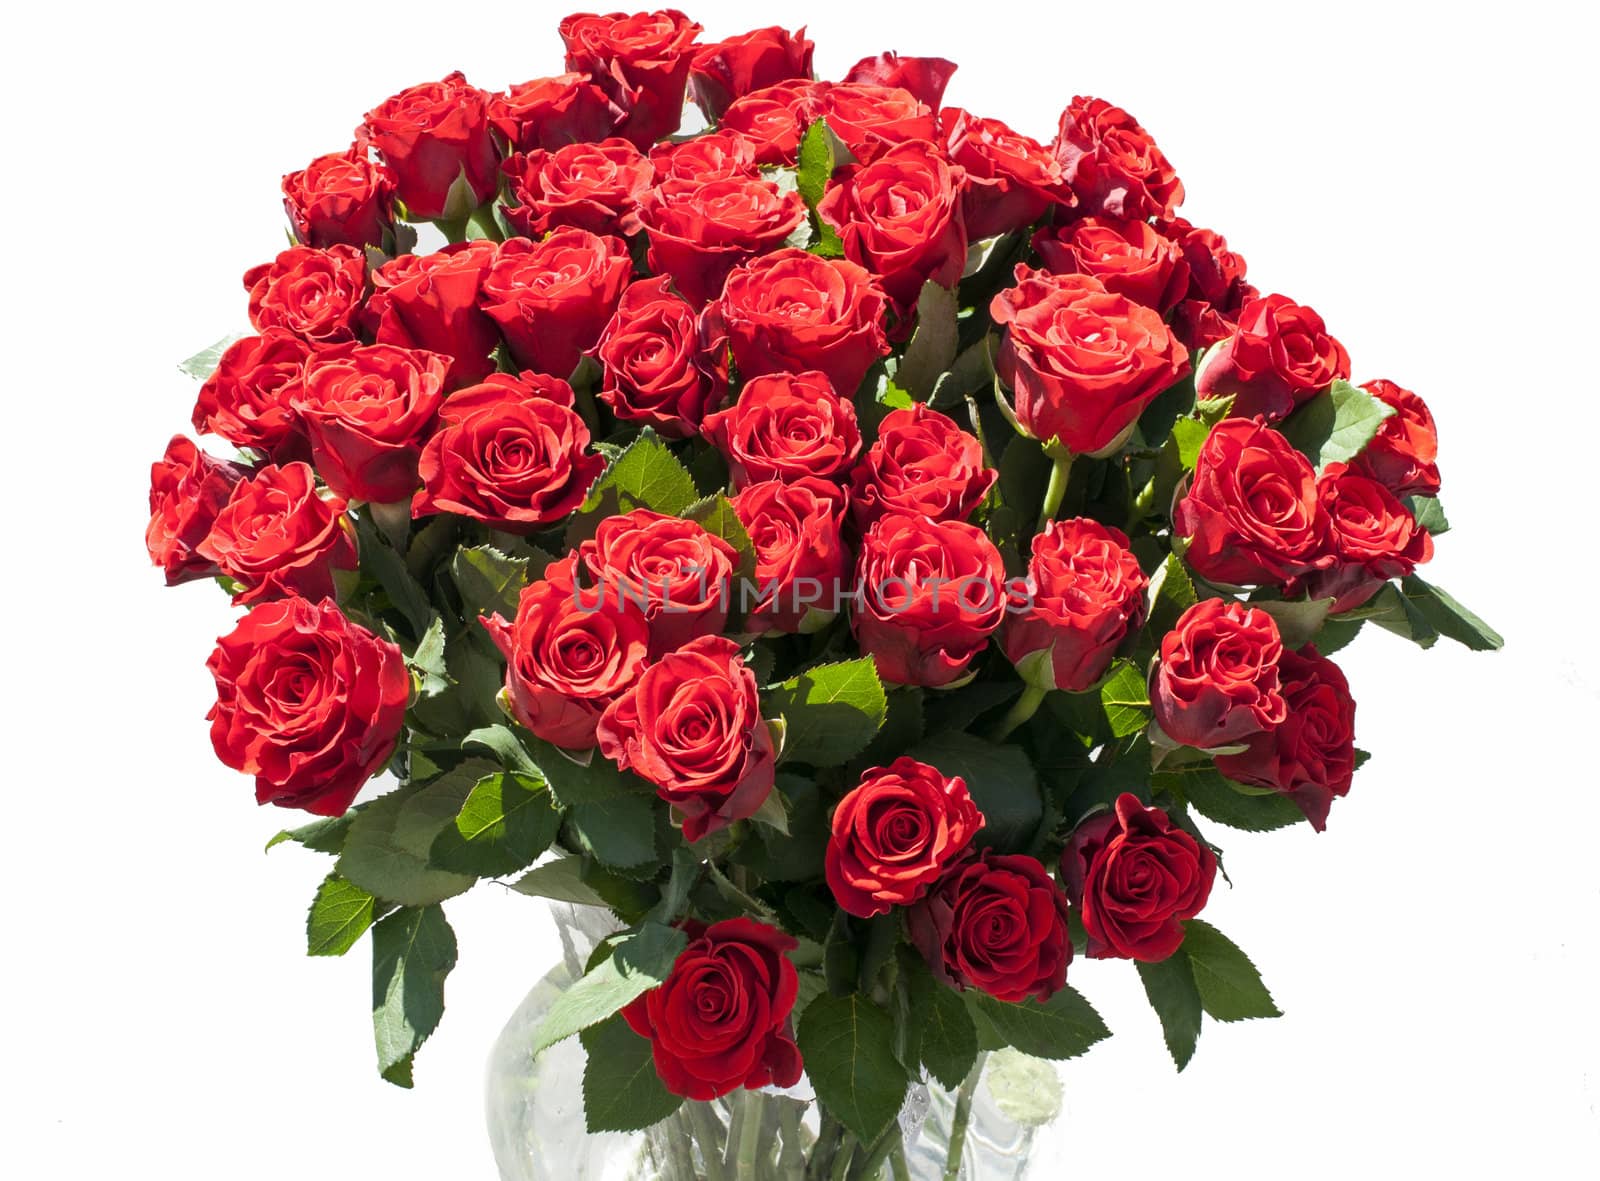 vase with red roses by compuinfoto